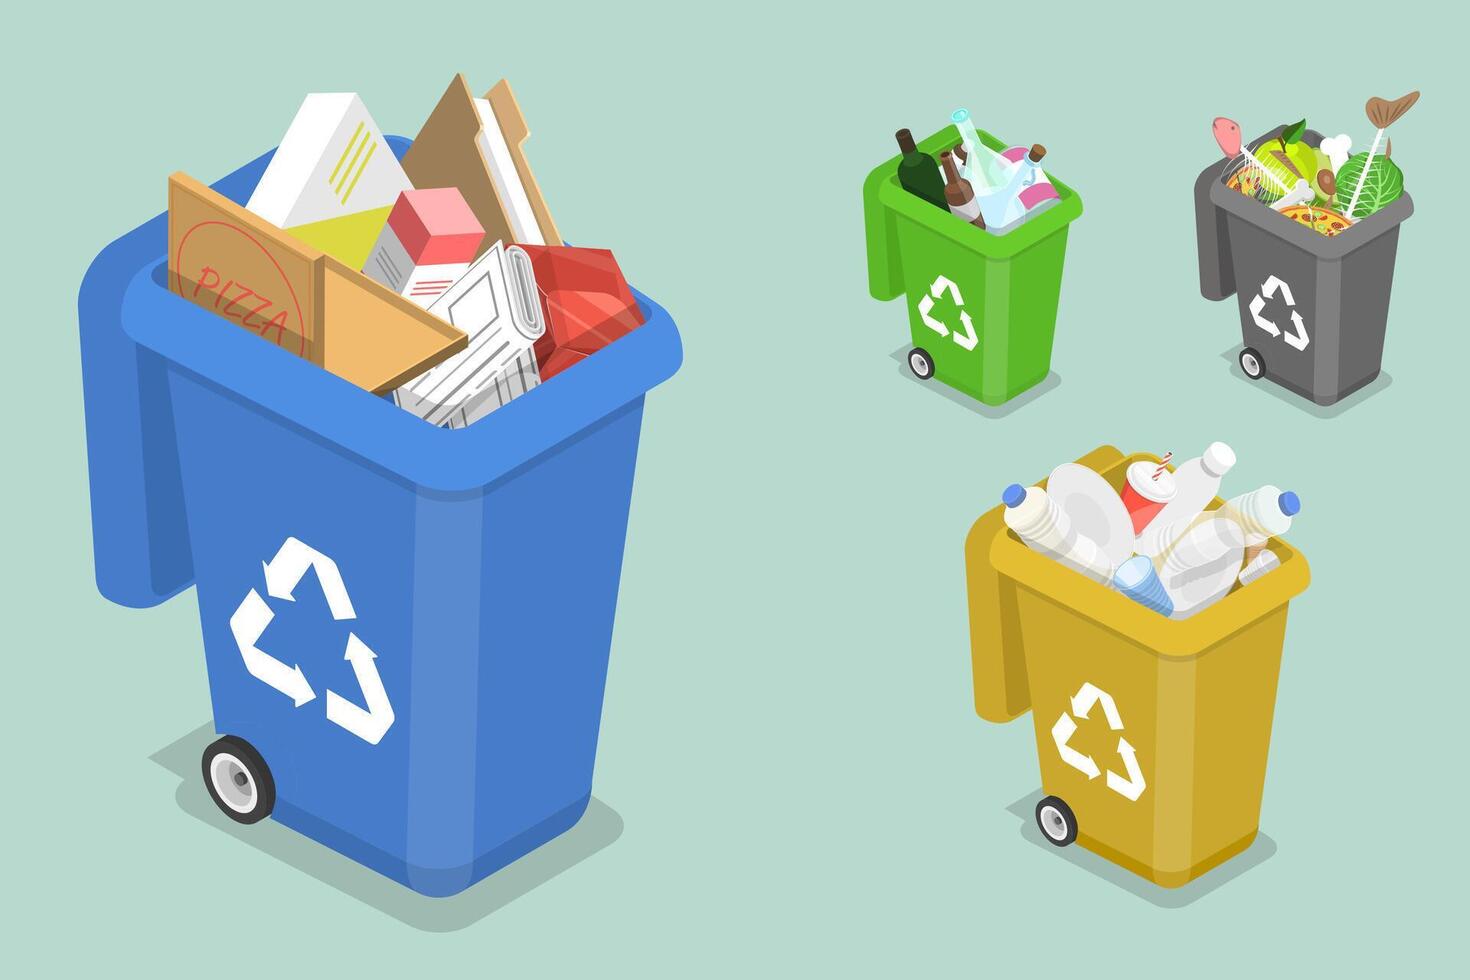 3D Isometric Flat Concept of Sorting Waste for Recycling. vector